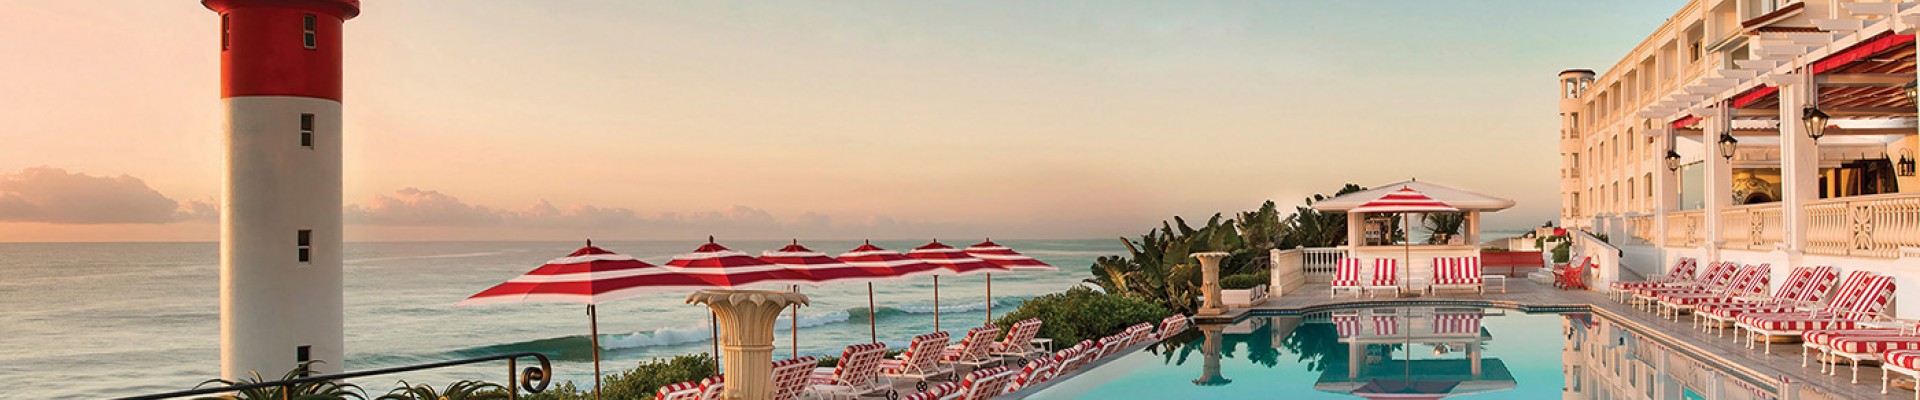 5* The Oyster Box - Umhlanga Package (3 Nights)